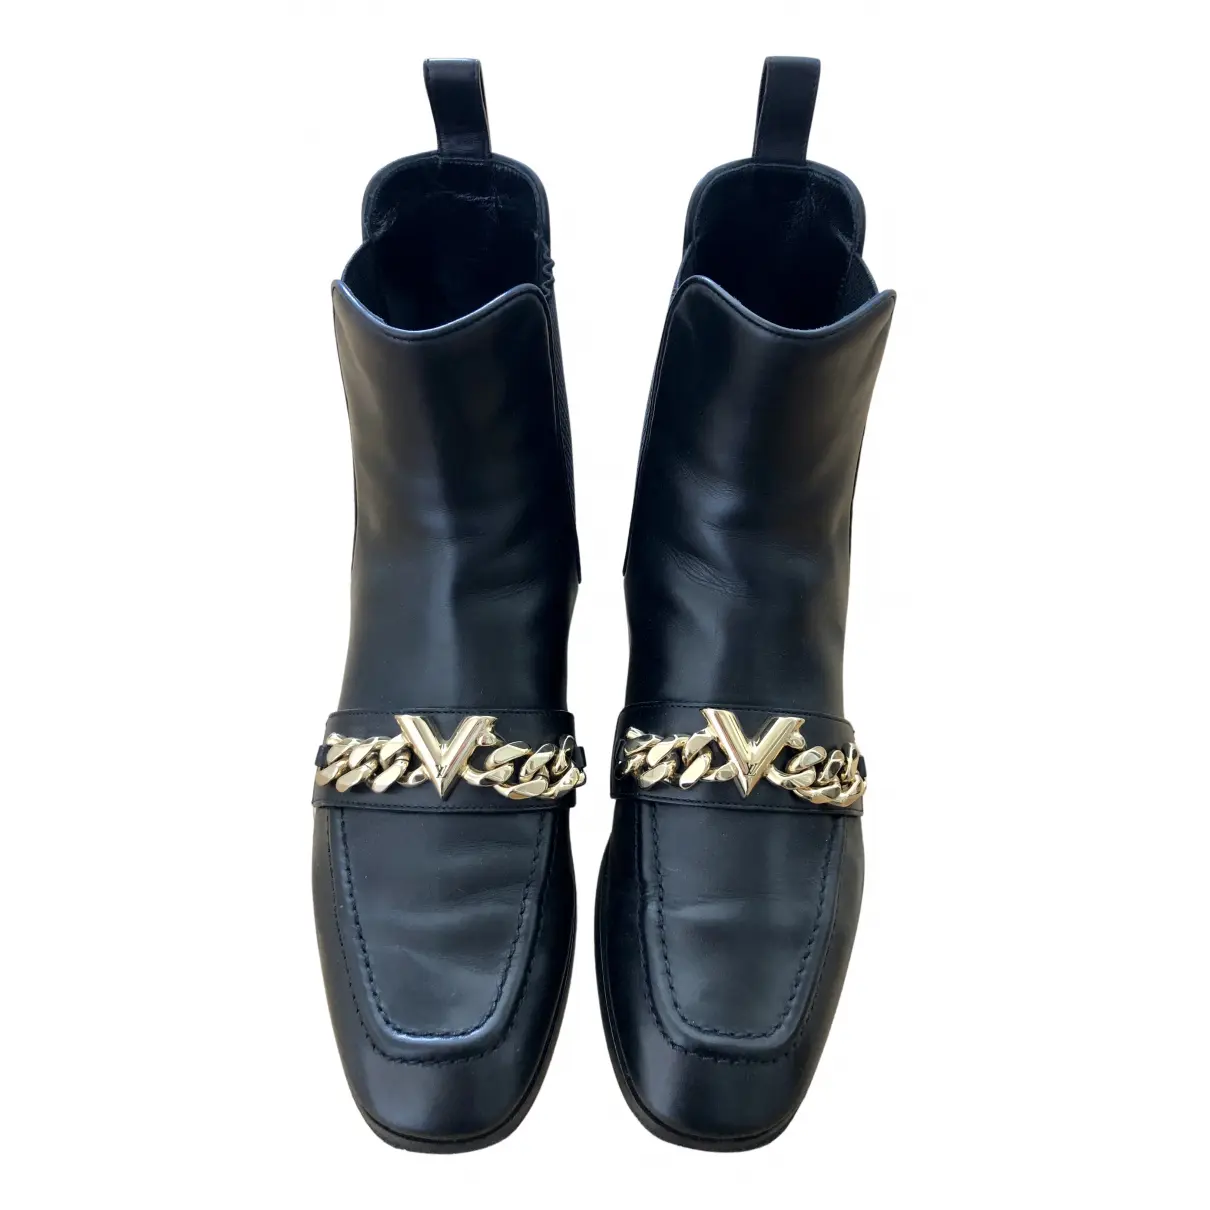 Skyline leather ankle boots Louis Vuitton